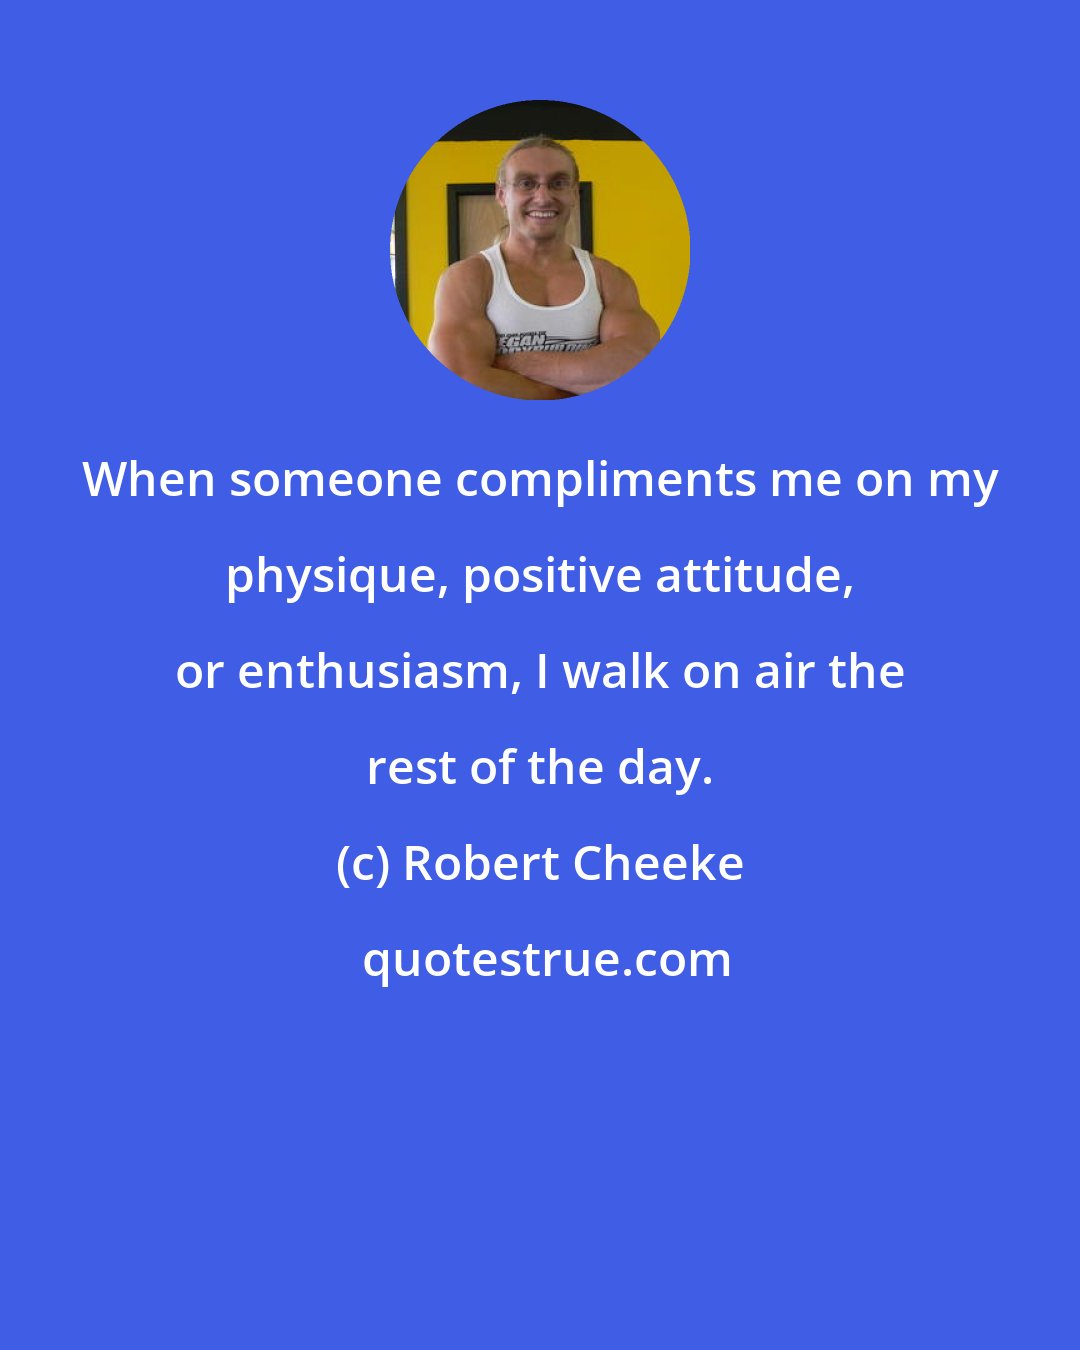 Robert Cheeke: When someone compliments me on my physique, positive attitude, or enthusiasm, I walk on air the rest of the day.